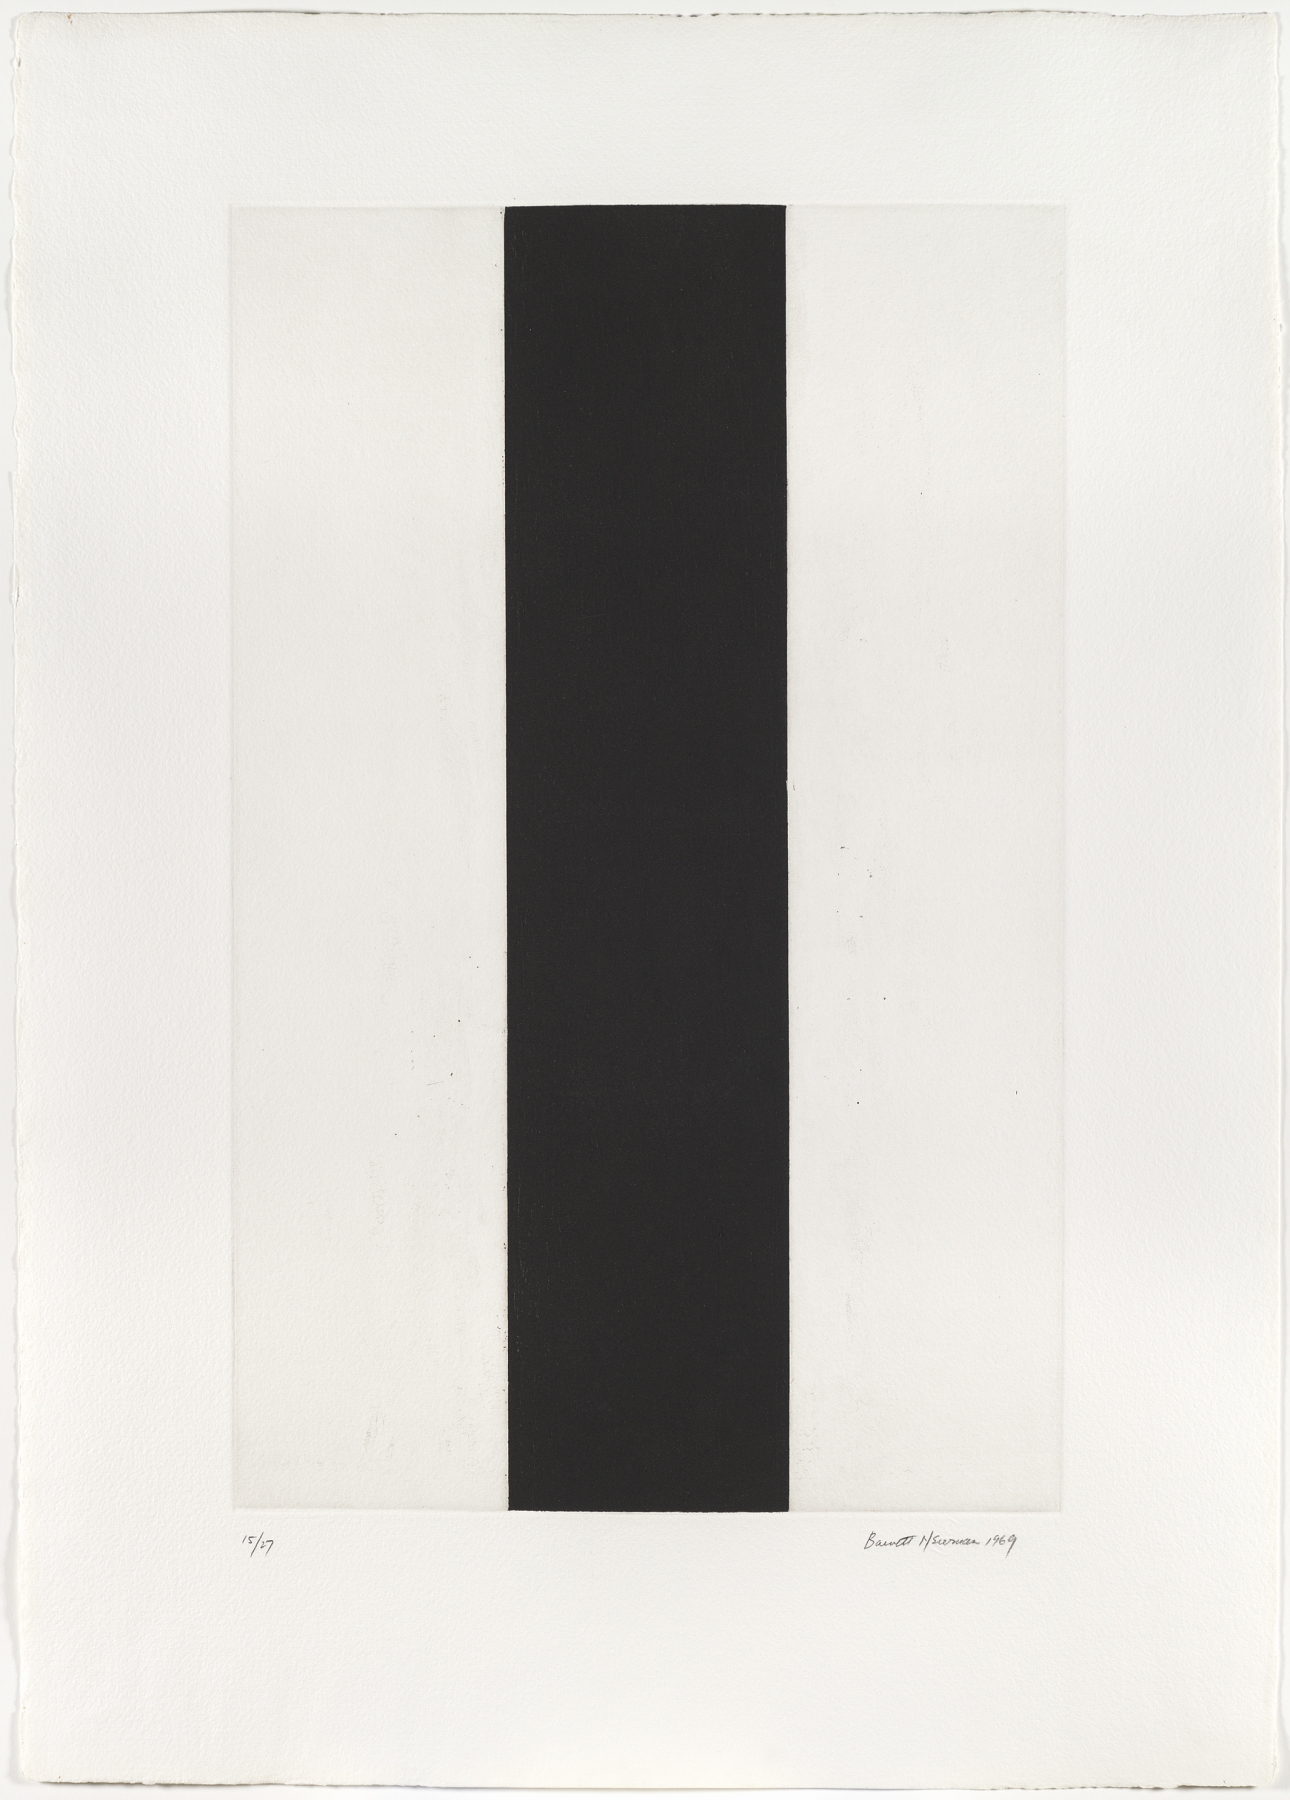 Barnett Newman,&nbsp;Untitled Etching #2, 1969.

Etching and aquatint,&nbsp;23 3/8 x 14 5/8 inches, Plate;&nbsp;

31 3/4 x 22 7/16 inches, Sheet.

Edition of 27. Private Collection.